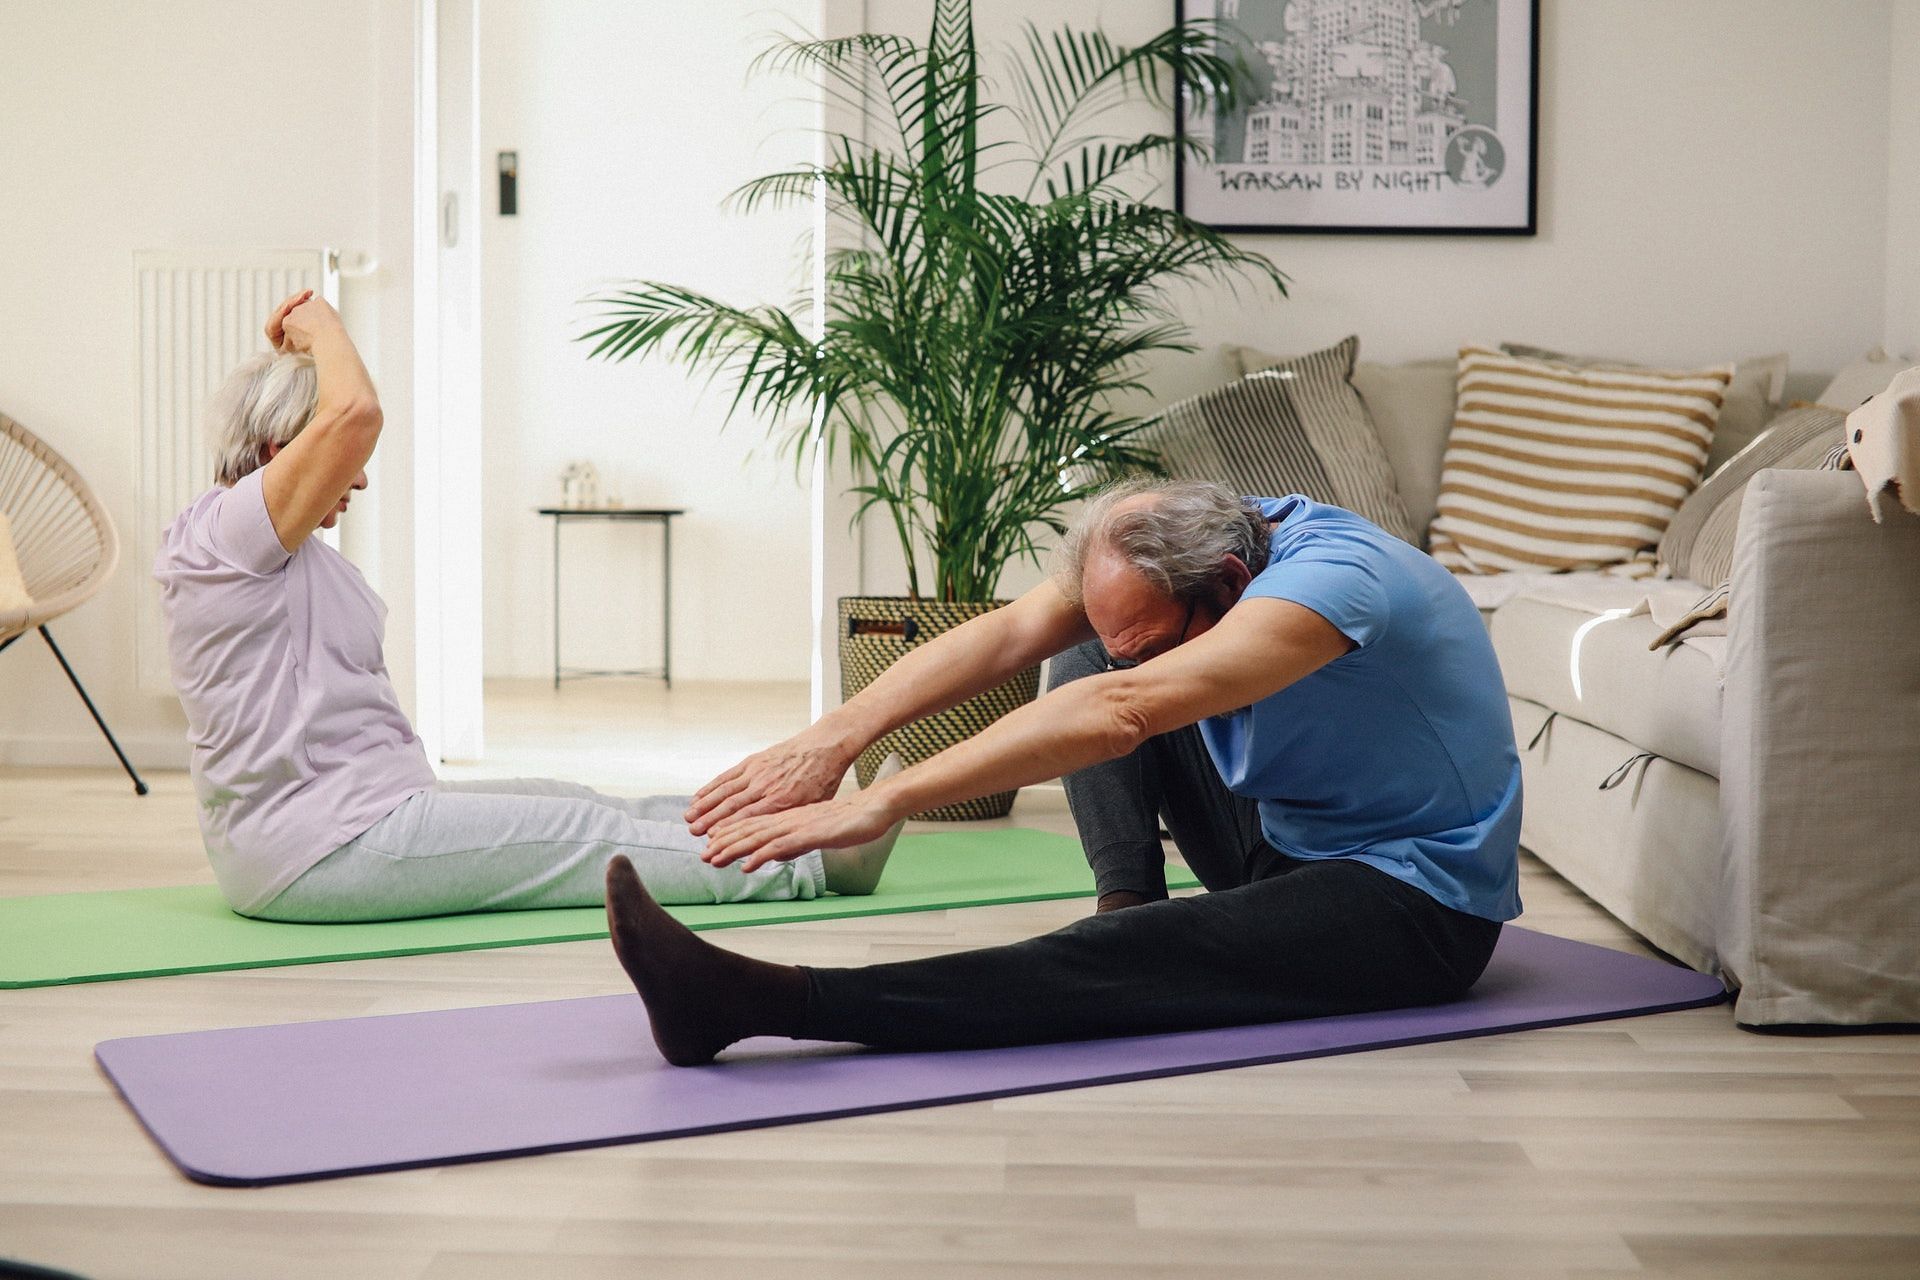 There are several basic exercises that seniors can do every day. (Photo by A Koolshooter via pexels)